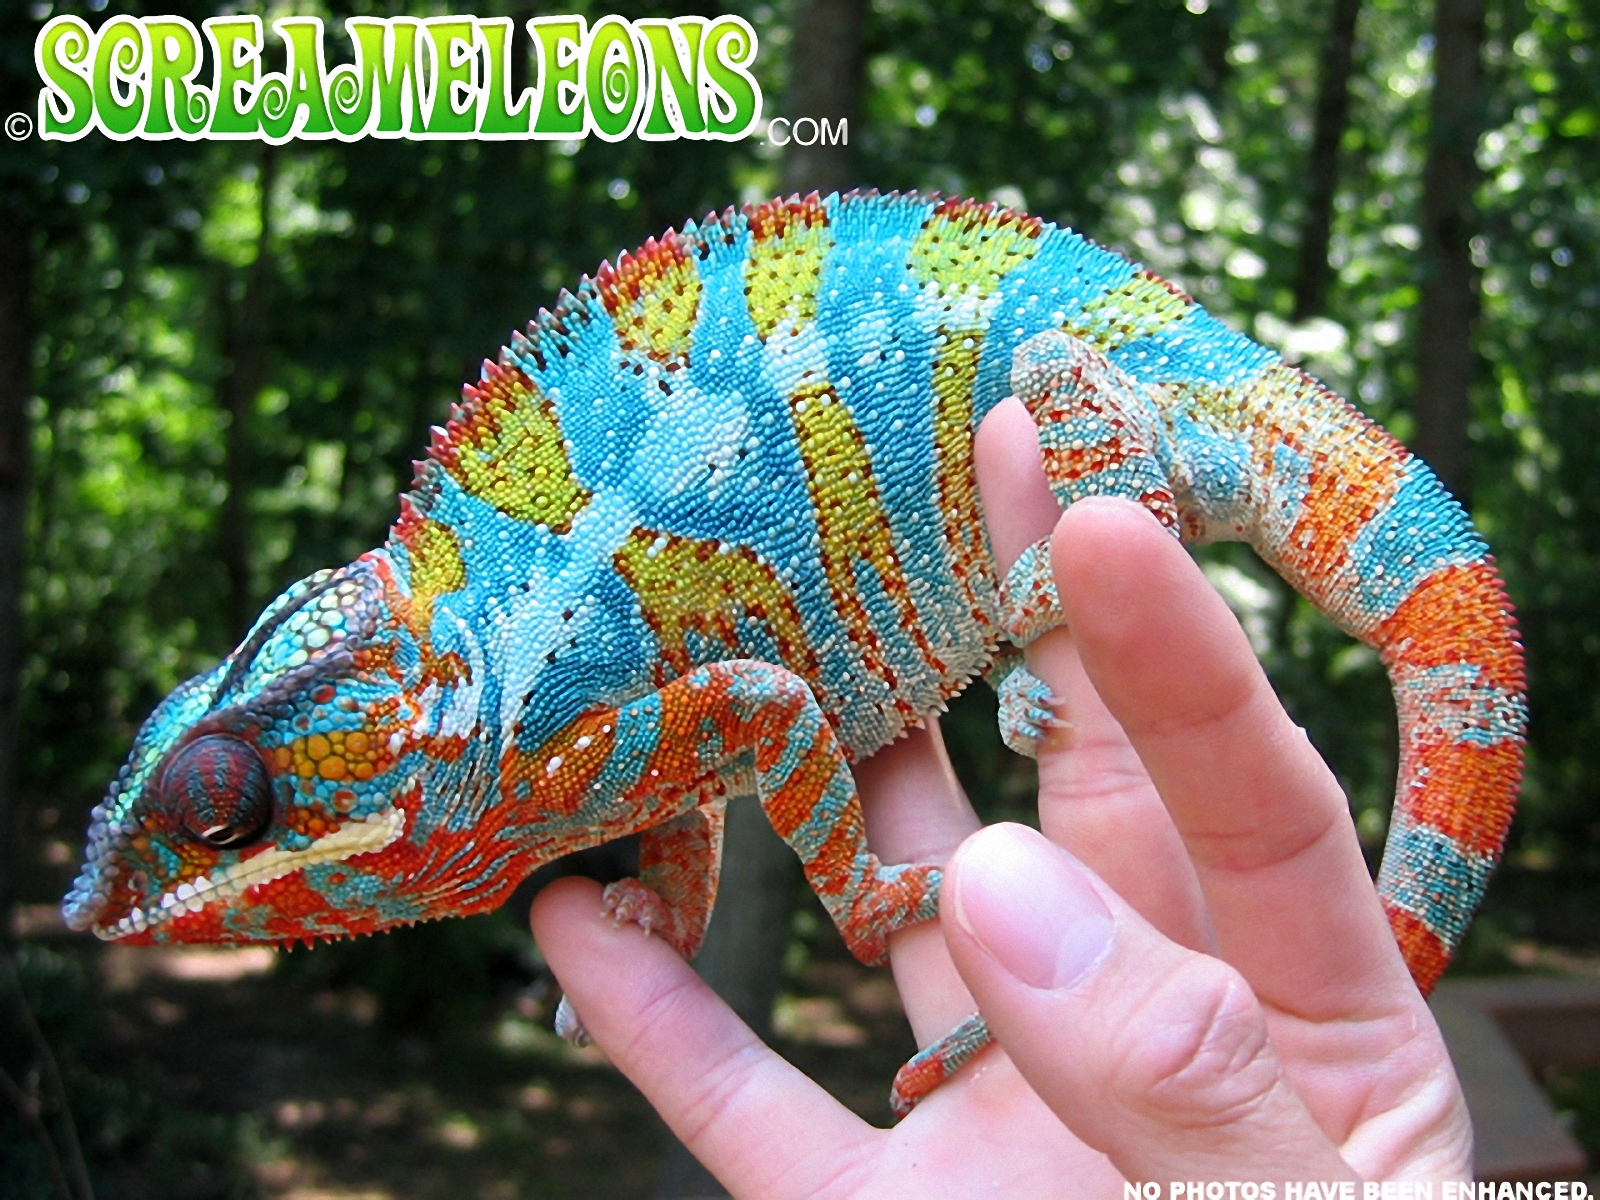 Blue And Red Panther Chameleon - HD Wallpaper 